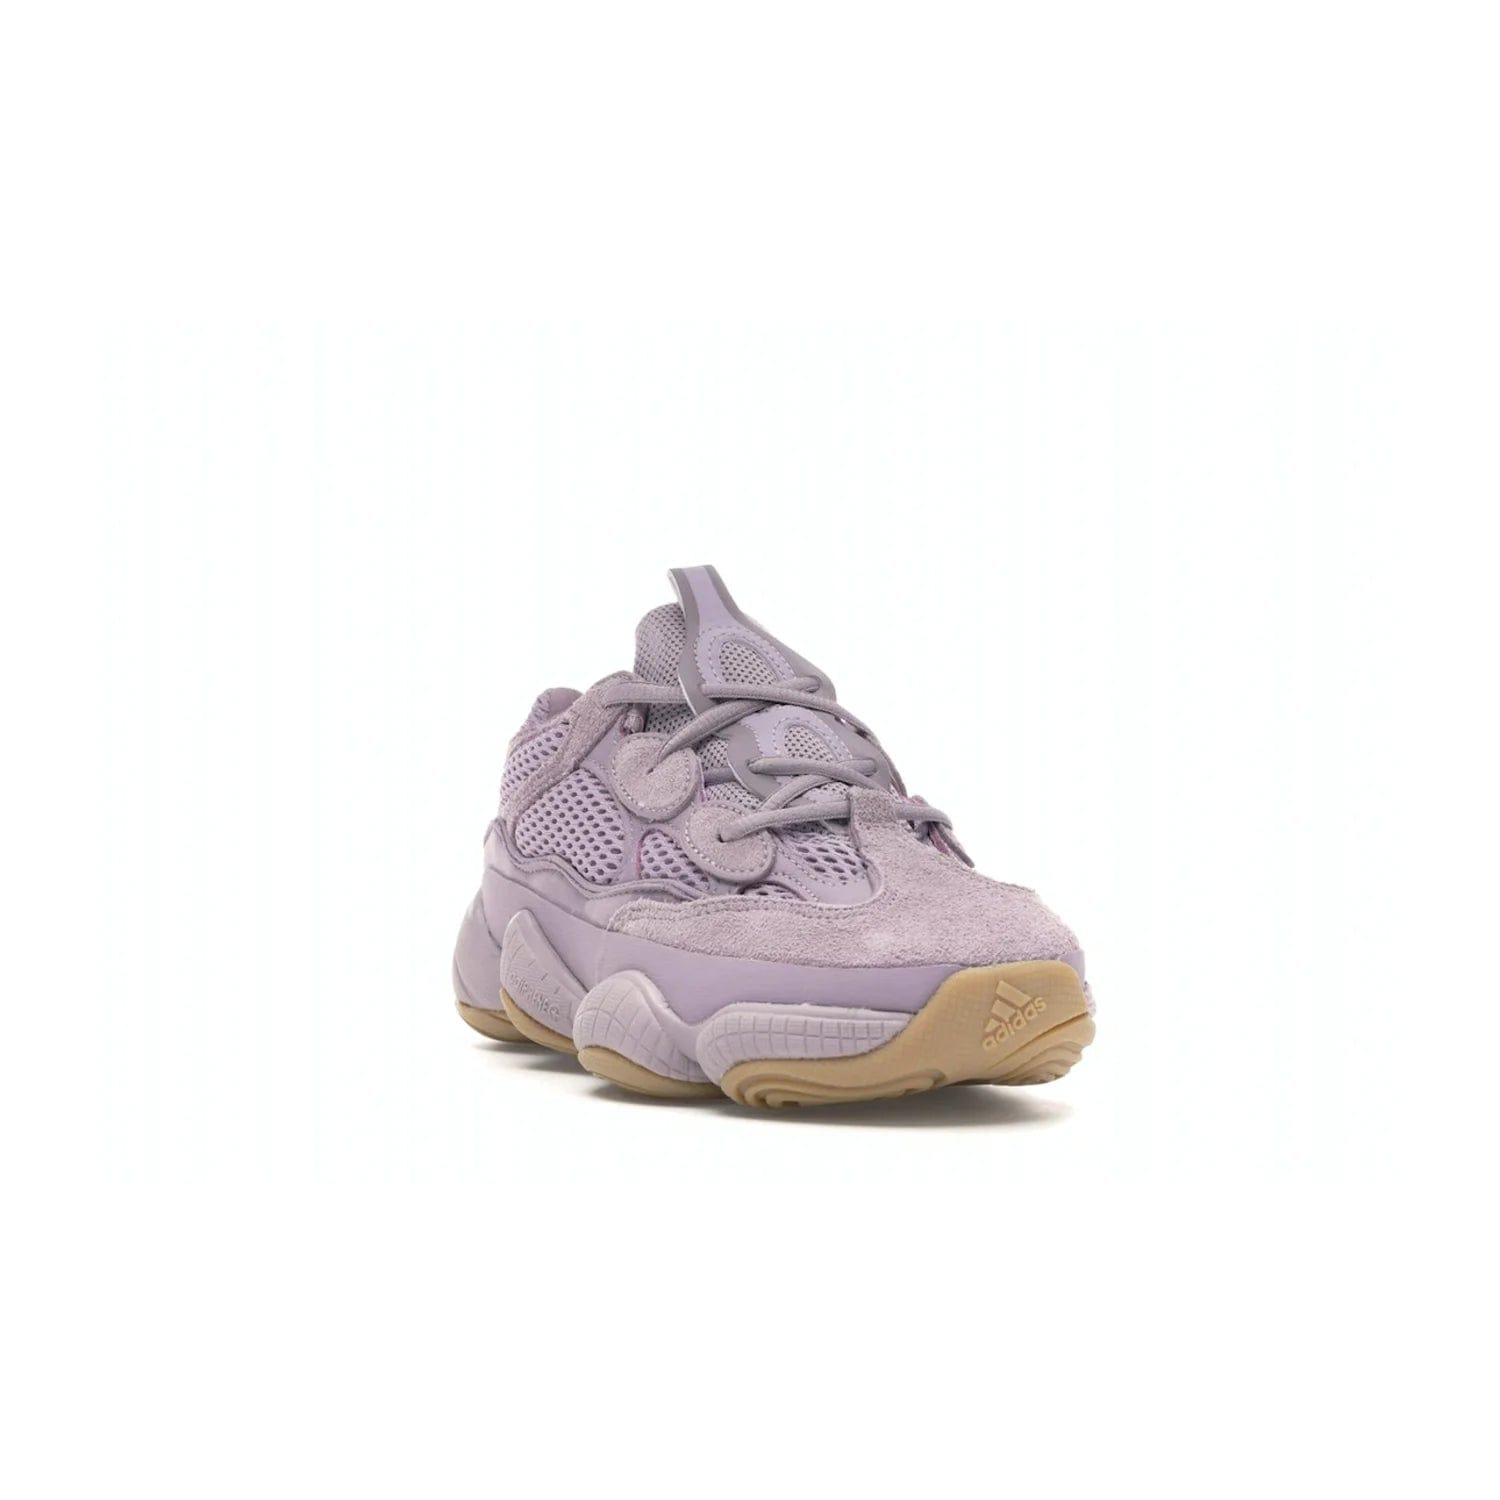 adidas Yeezy 500 Soft Vision - Image 7 - Only at www.BallersClubKickz.com - New adidas Yeezy 500 Soft Vision sneaker featuring a combination of mesh, leather, and suede in a classic Soft Vision colorway. Gum rubber outsole ensures durability and traction. An everyday sneaker that stands out from the crowd.